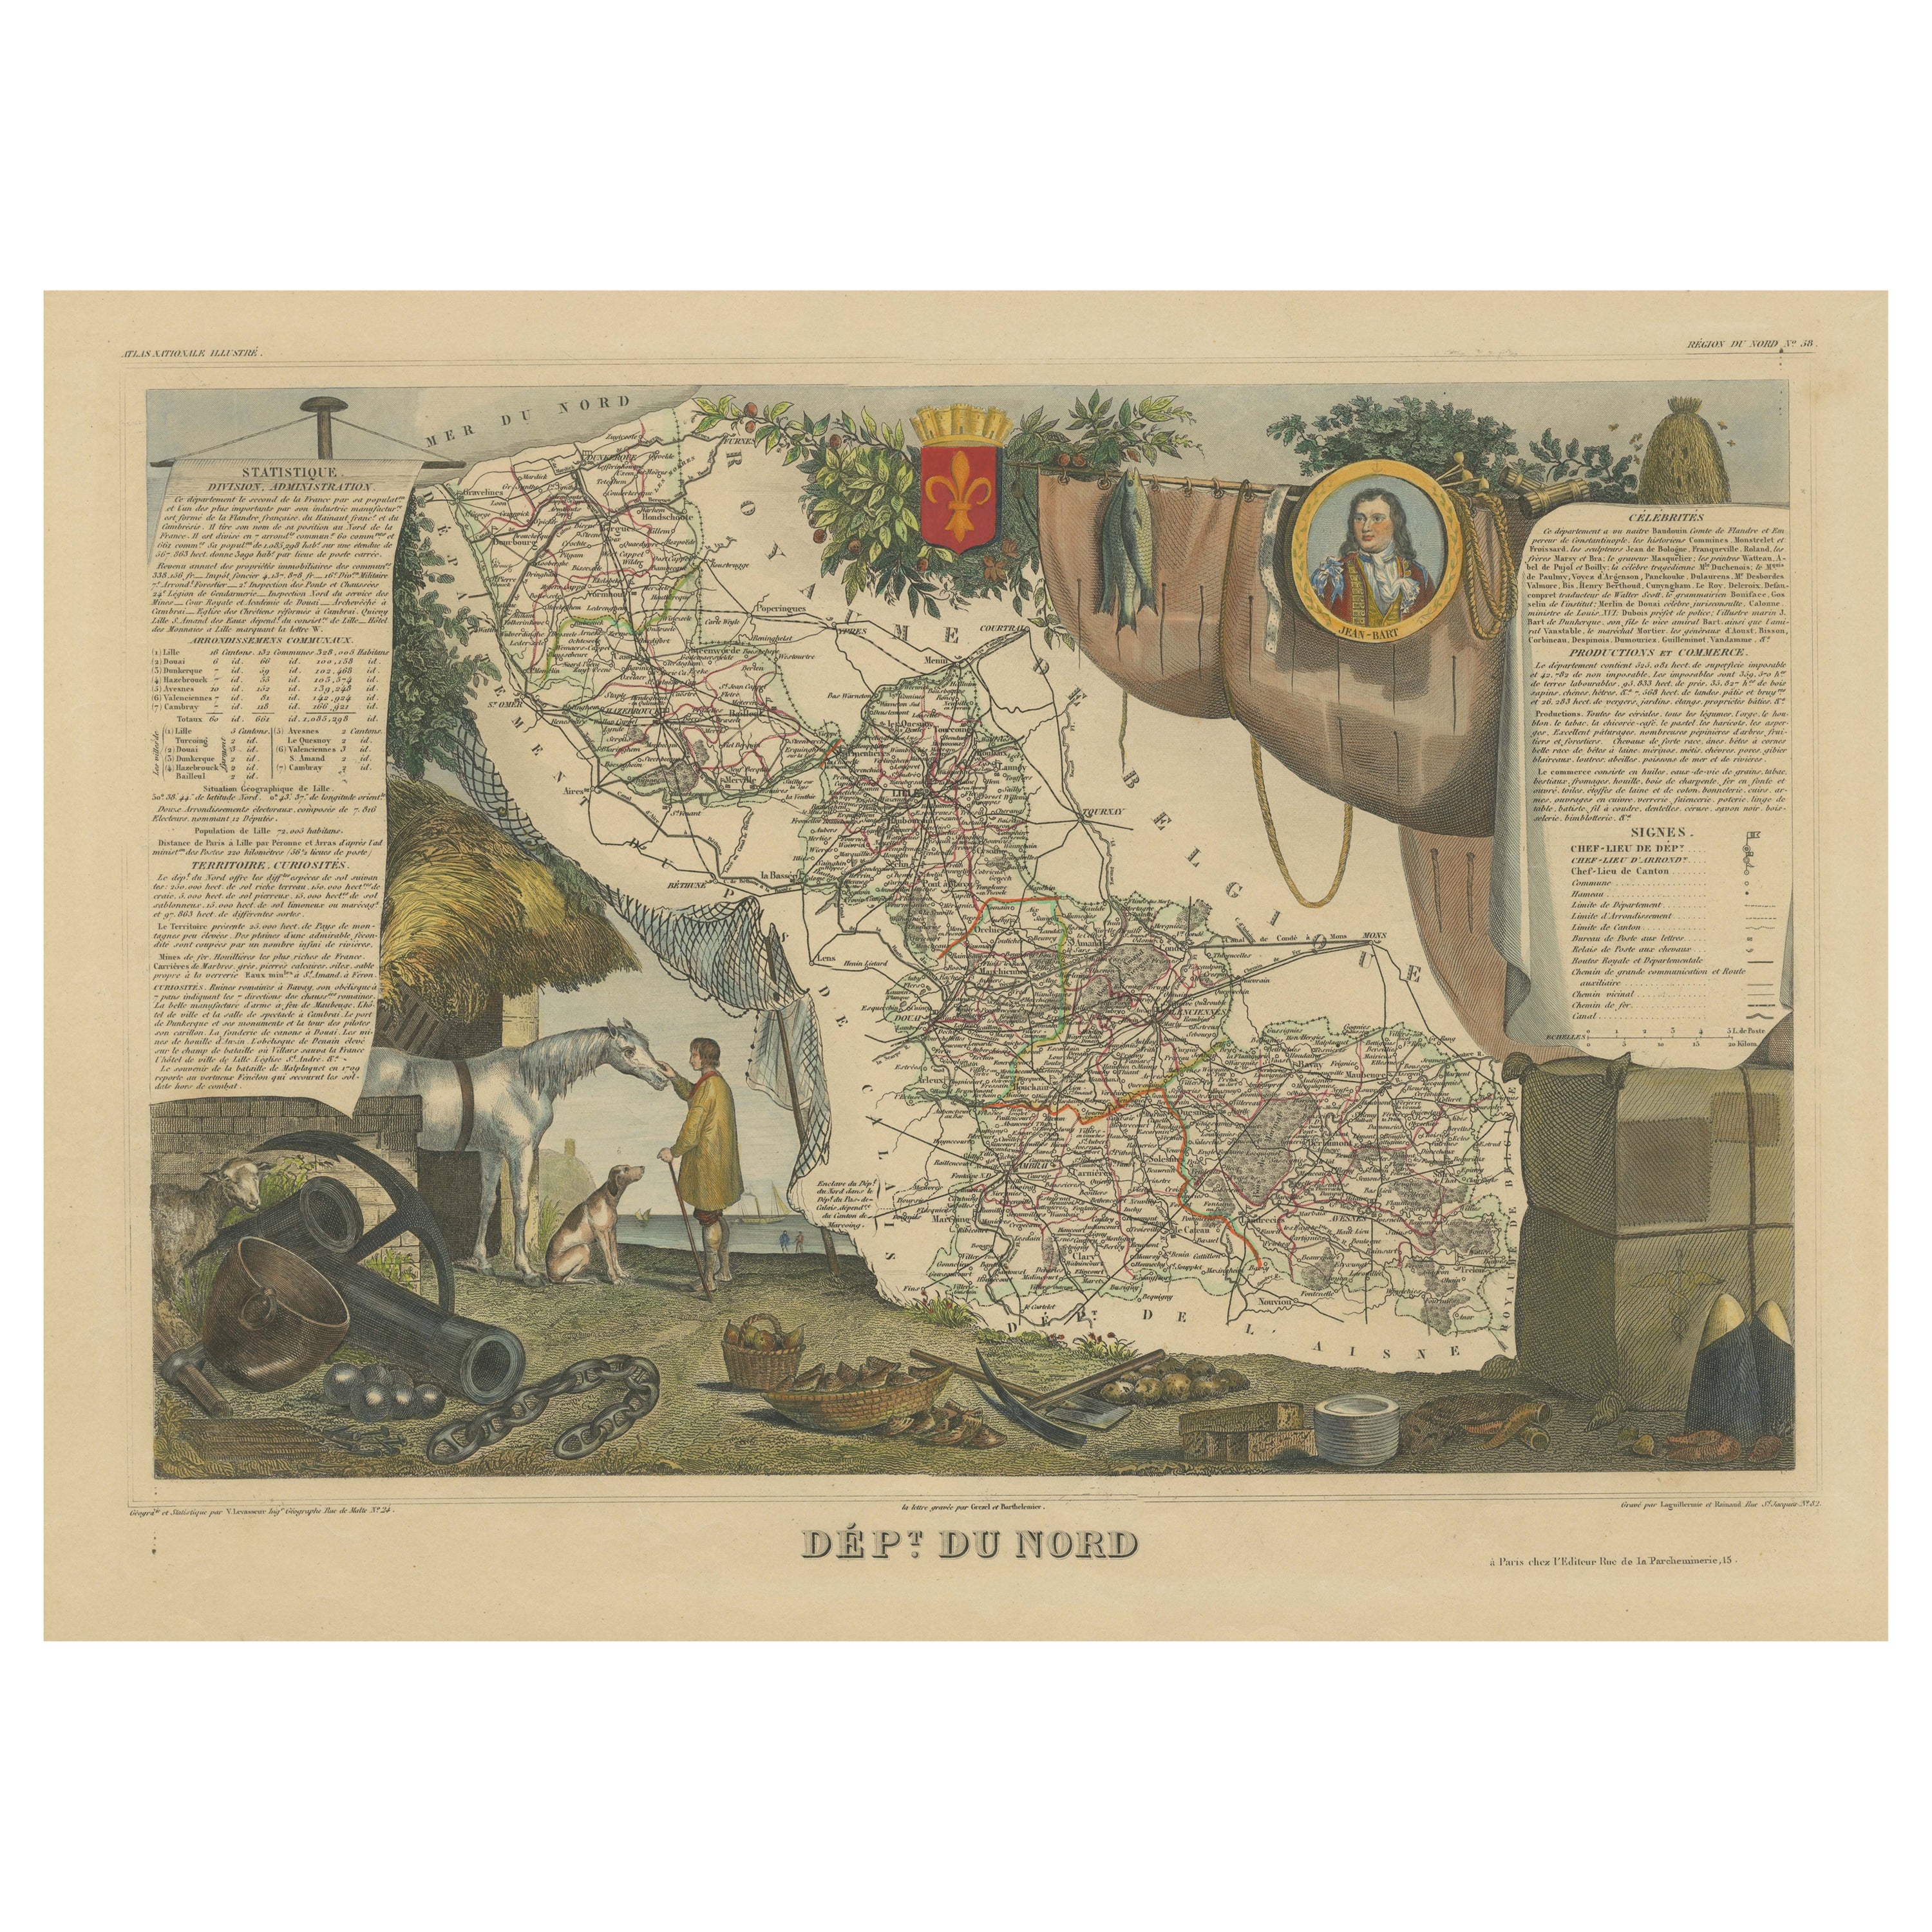 Hand Colored Antique Map of the Department of Nord, France